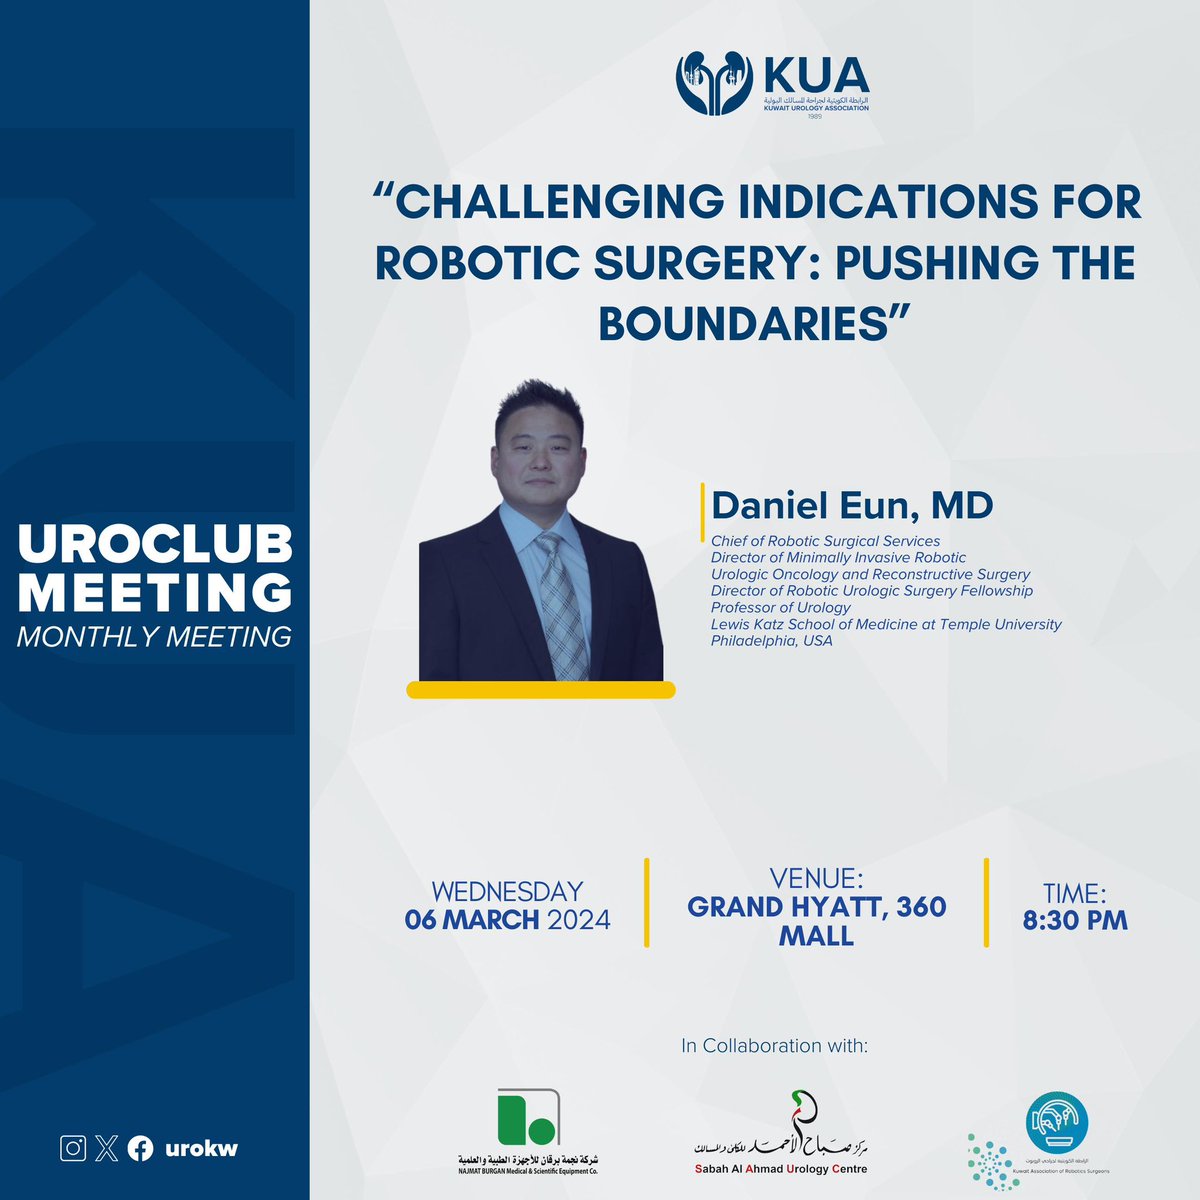 Save the dates and get ready for #KUA academic activities in March with a Minimally invasive and Robotic pioneer visiting #kuwait A workshop and a Uroclub. @md_eun #Robotic #Minimally_Invasive